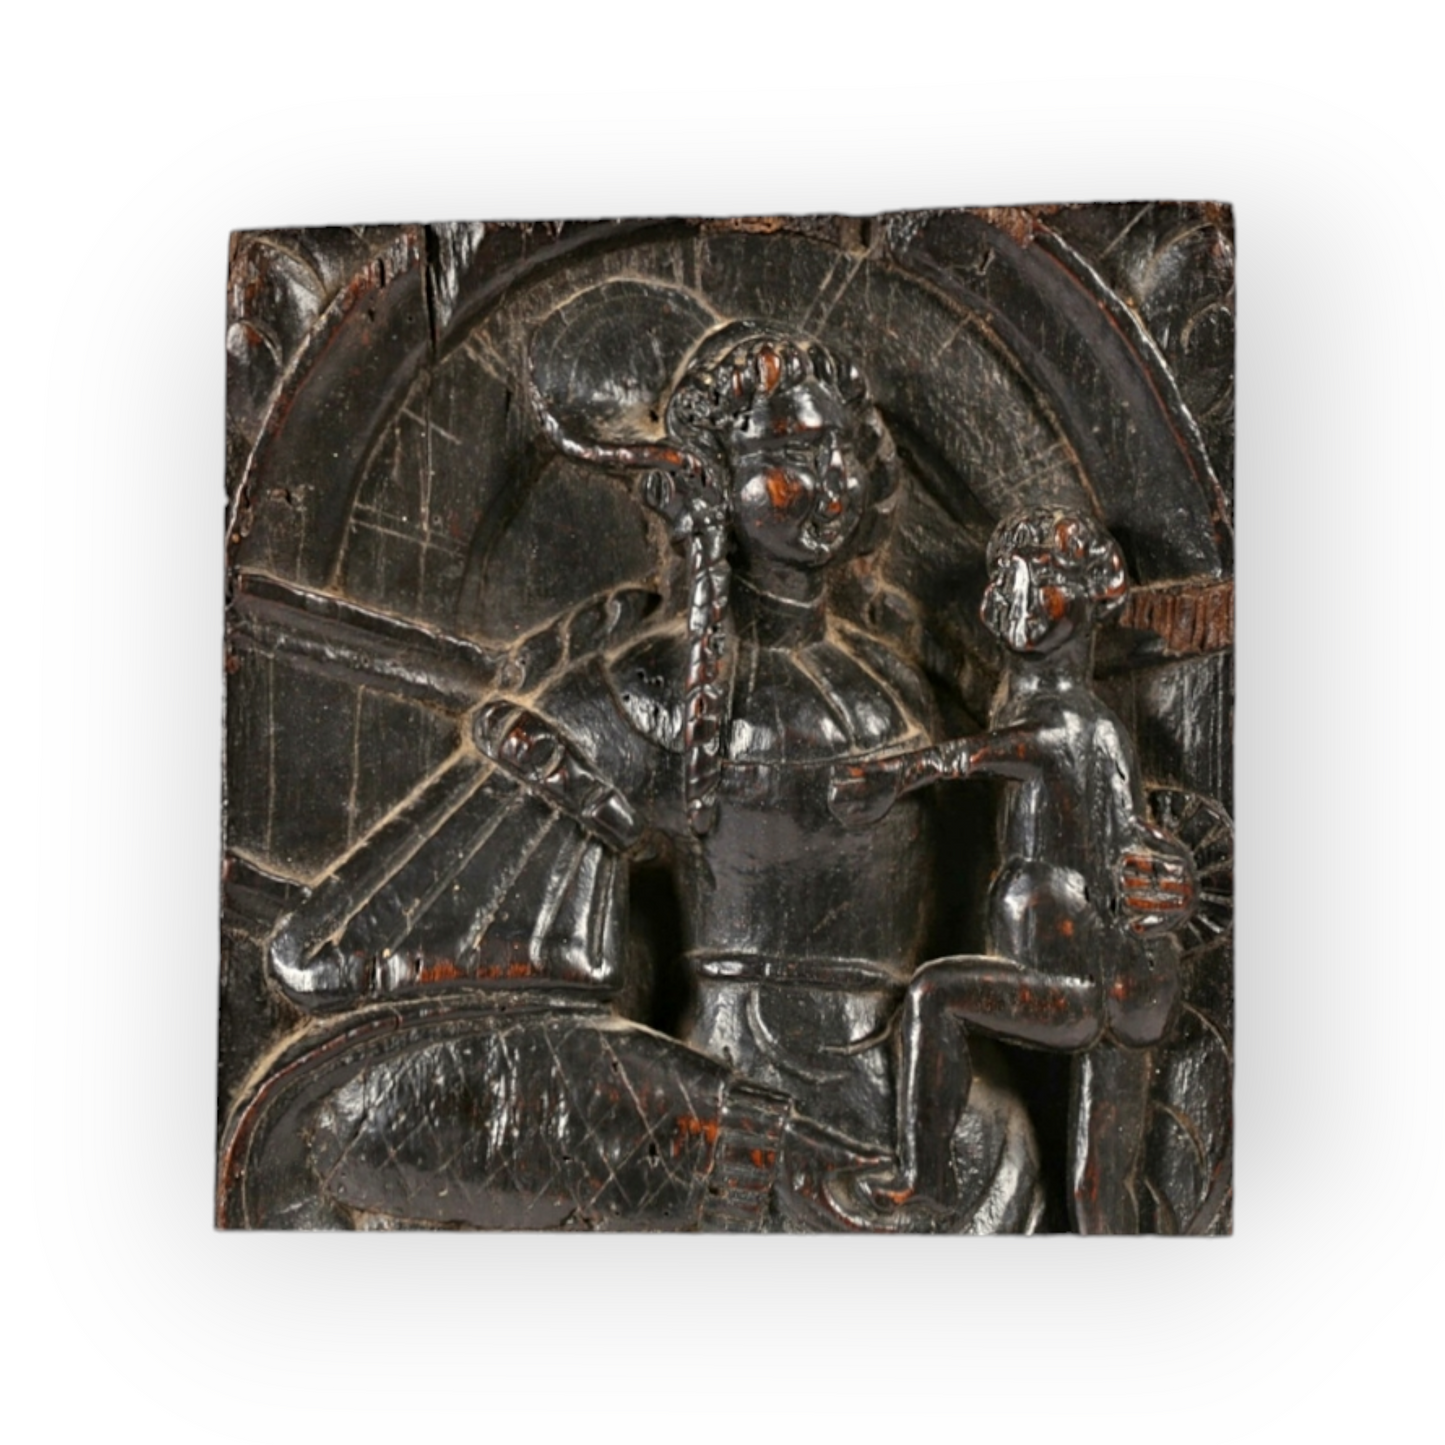 Late 16th Century Renaissance Period Antique Oak Carved Panel, Possibly The Madonna and Child, circa 1570